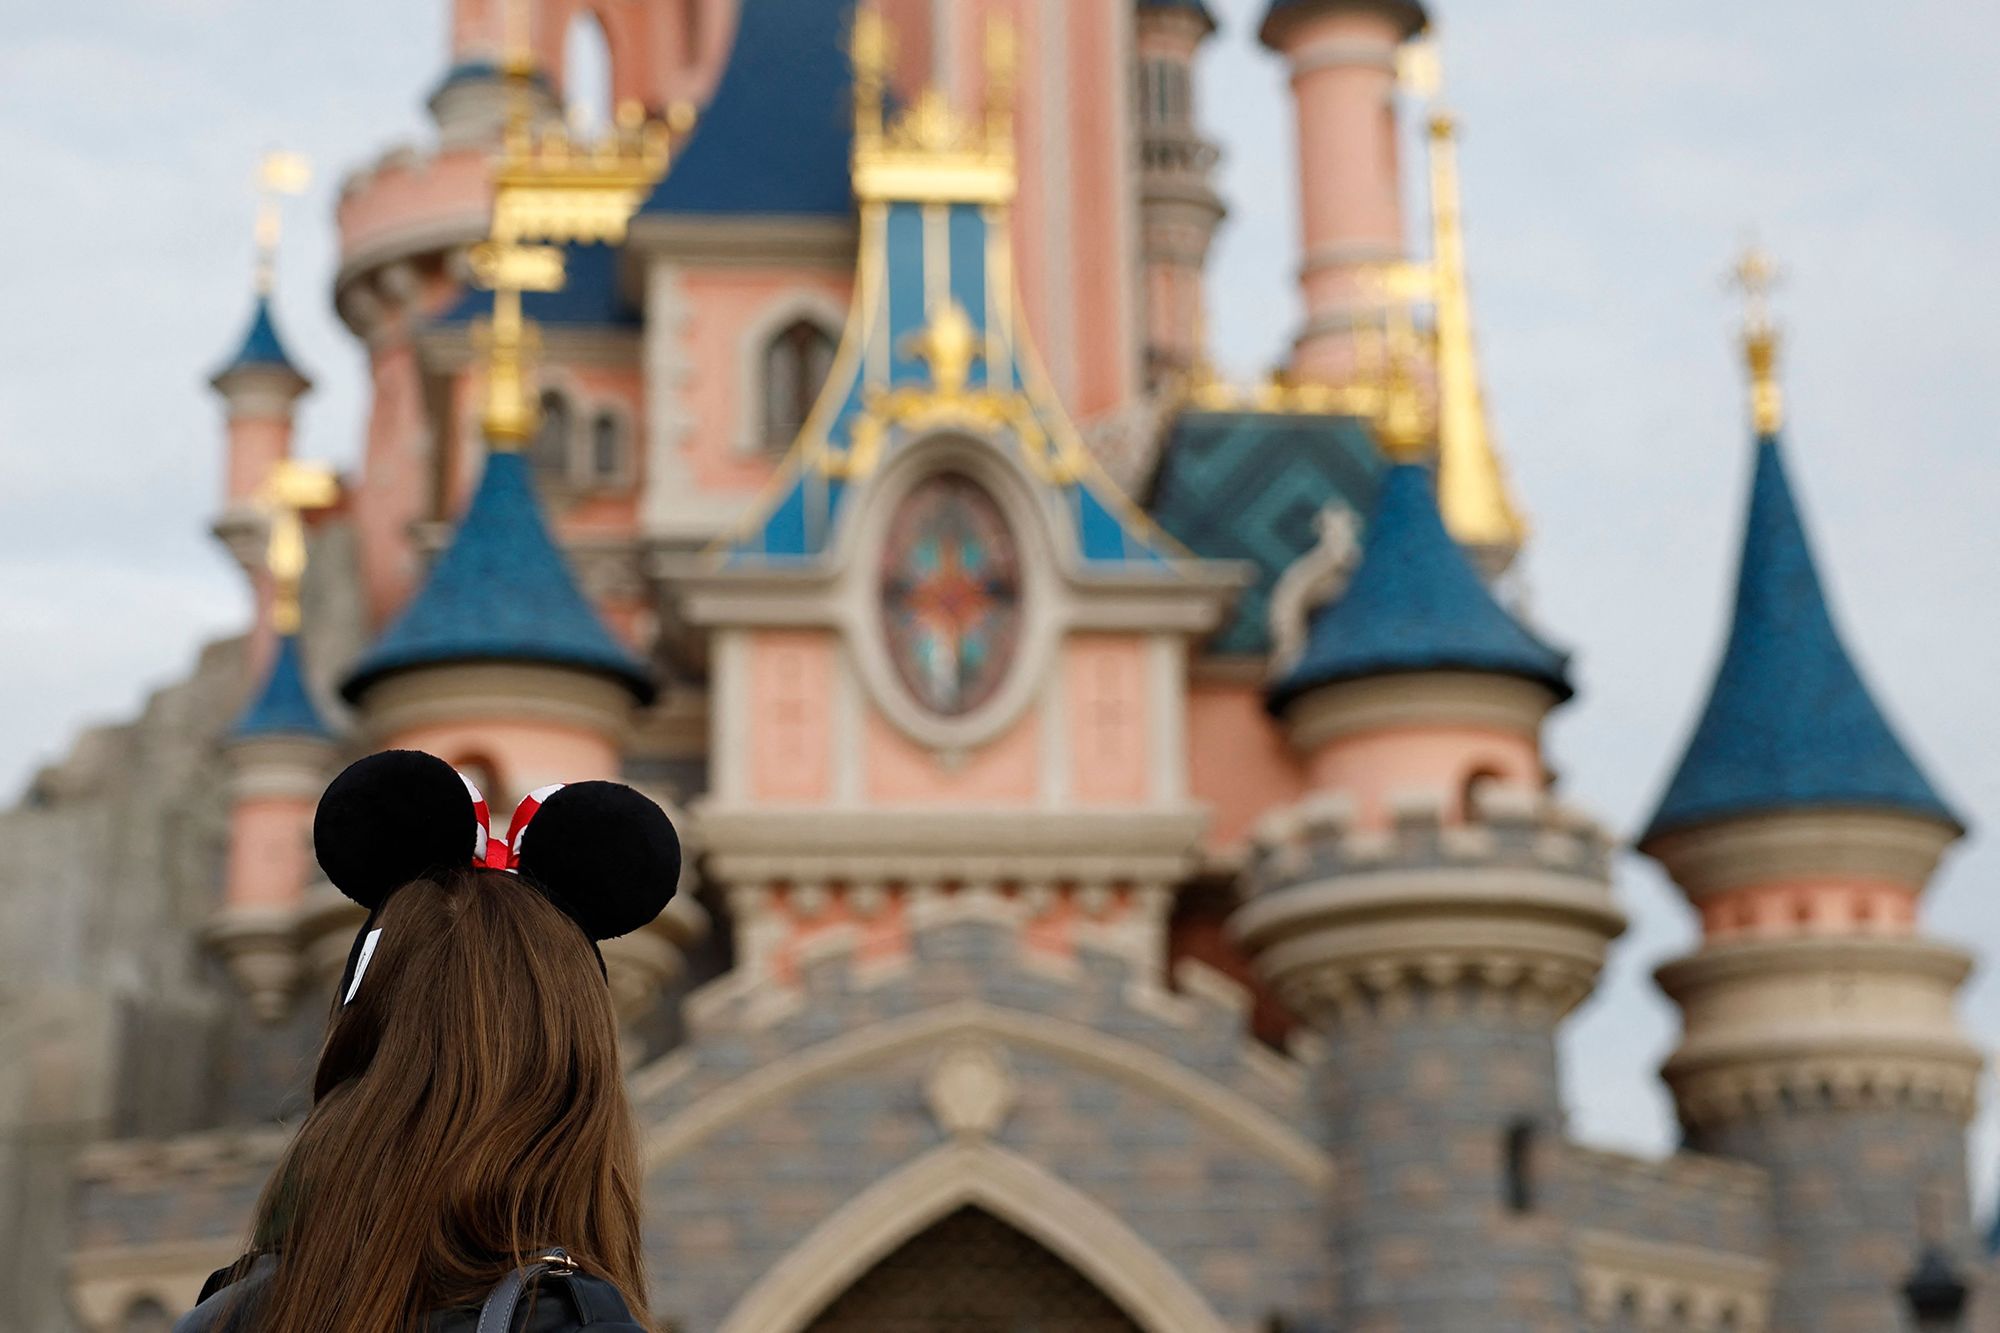 Disney theme park attendance shows signs of slowdown ahead of earnings